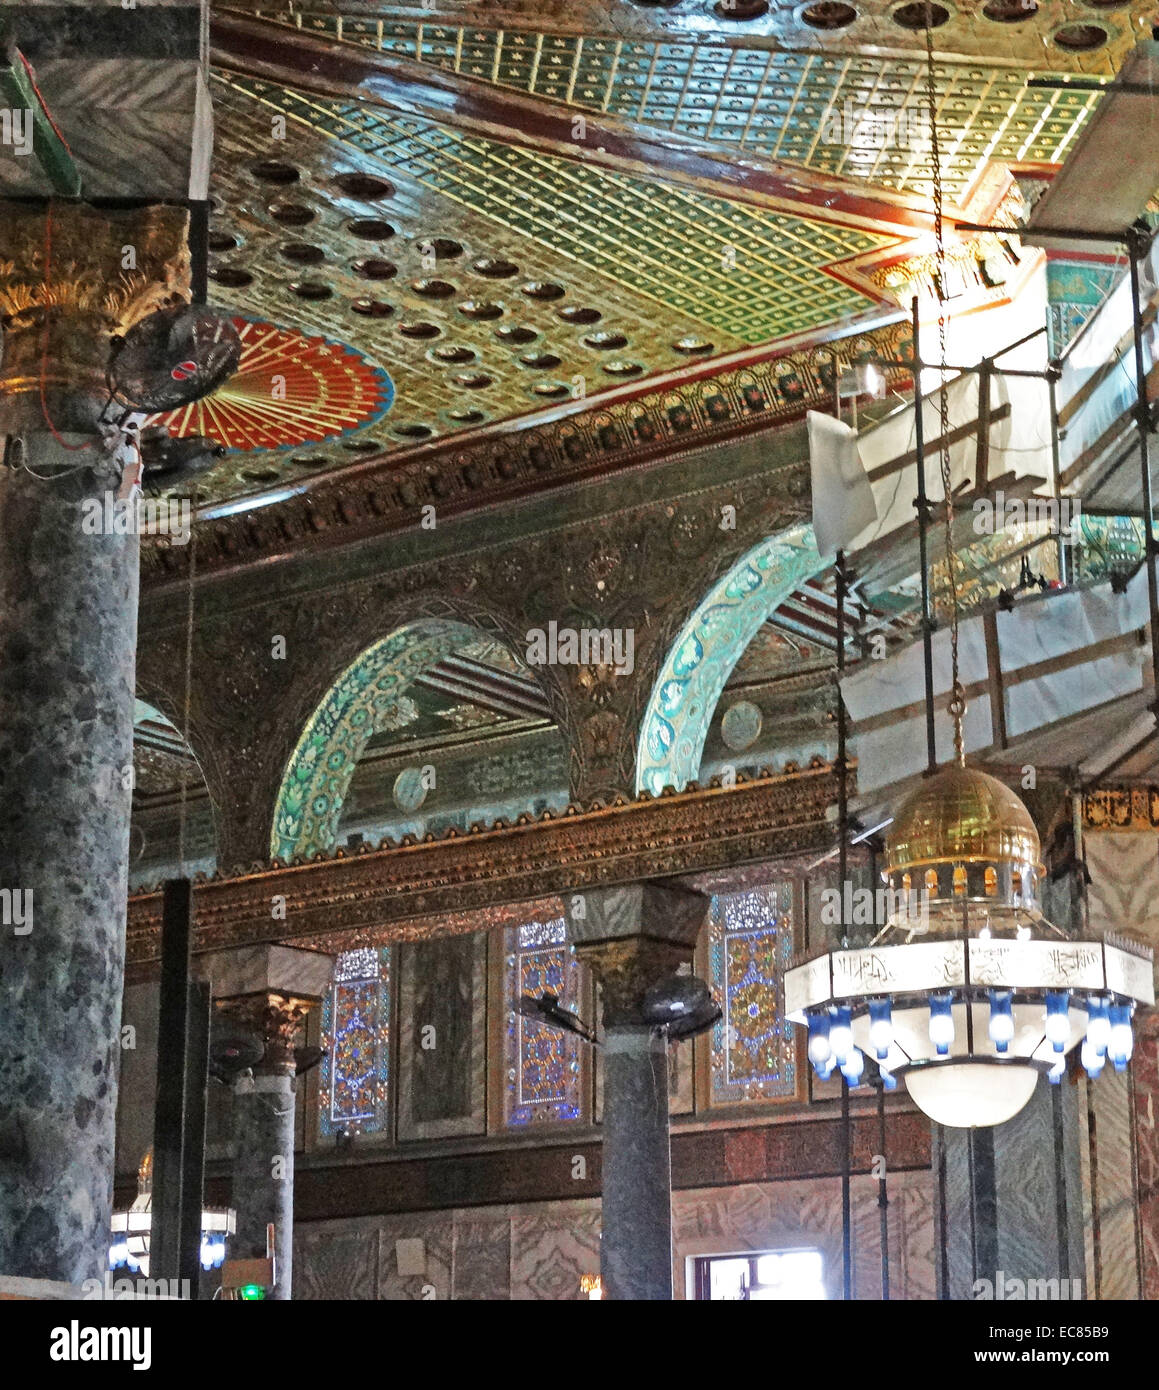 Interior Decoration Of The Dome Of The Rock Shrine Located